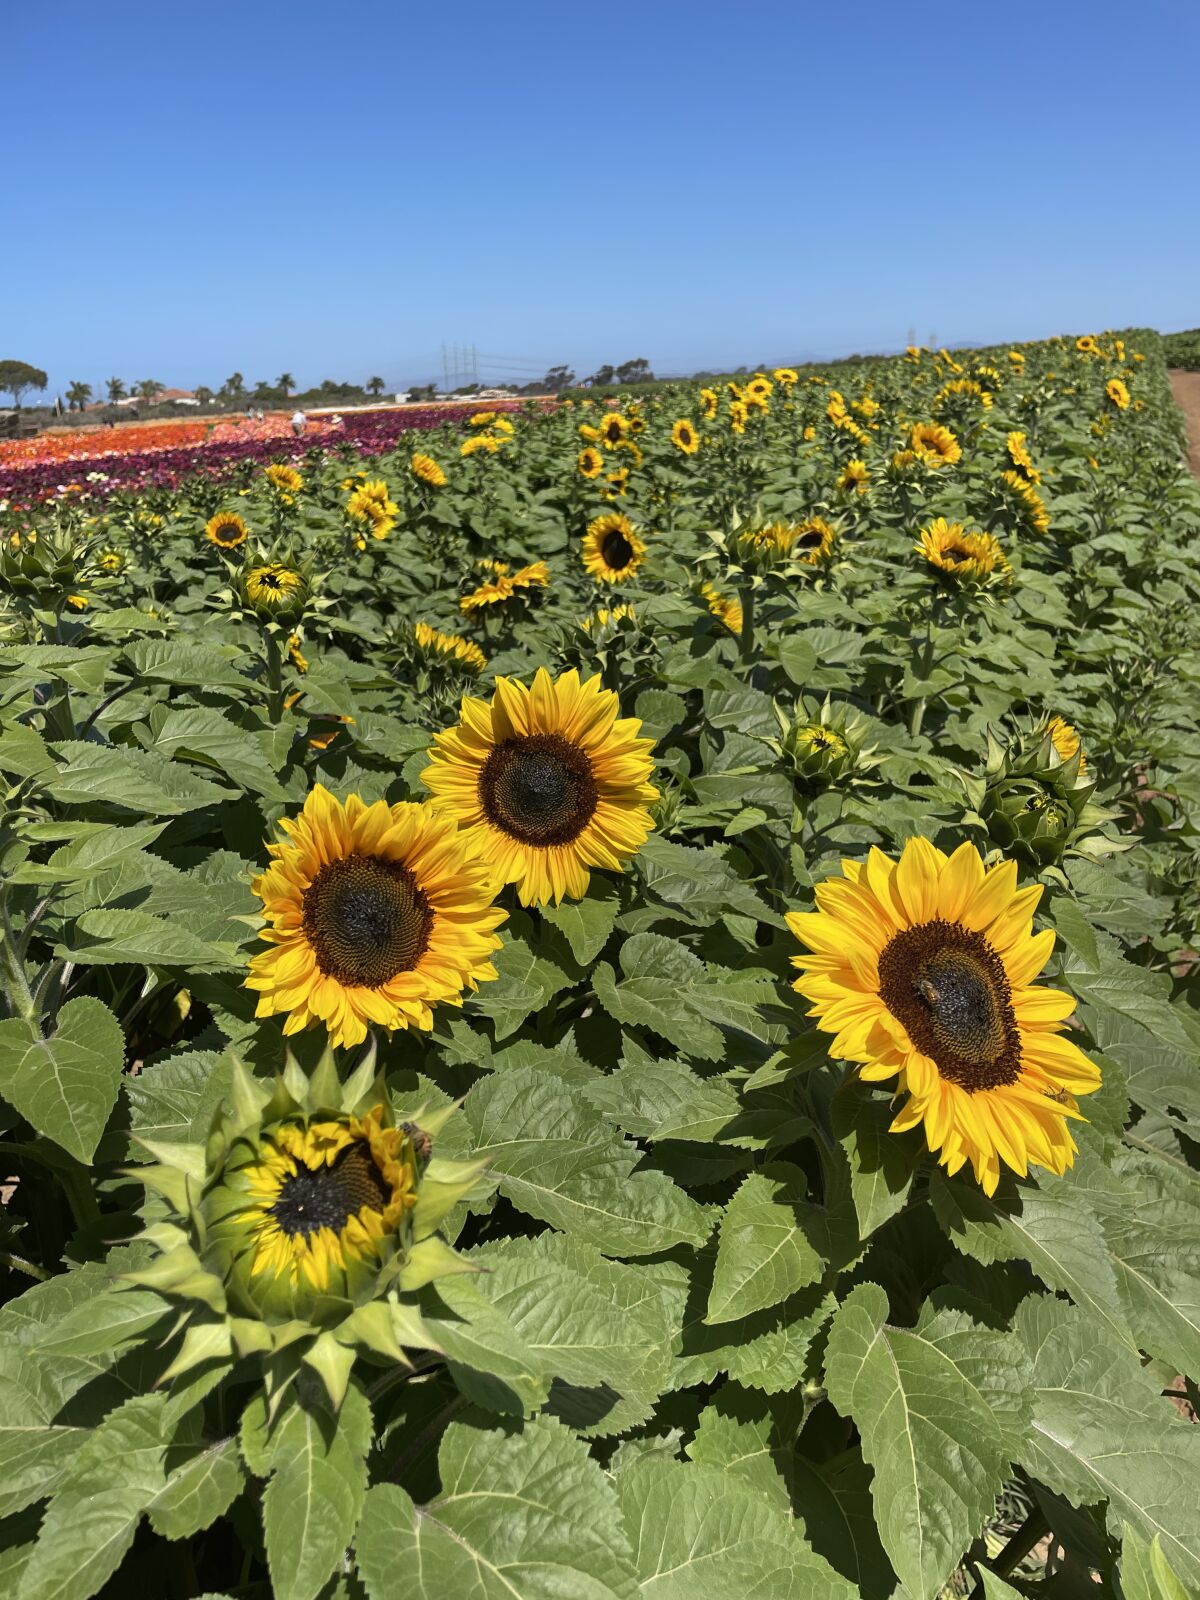 The Sea of Sunflowers attraction at The Flower Fields at Carlsbad Ranch in 2022.